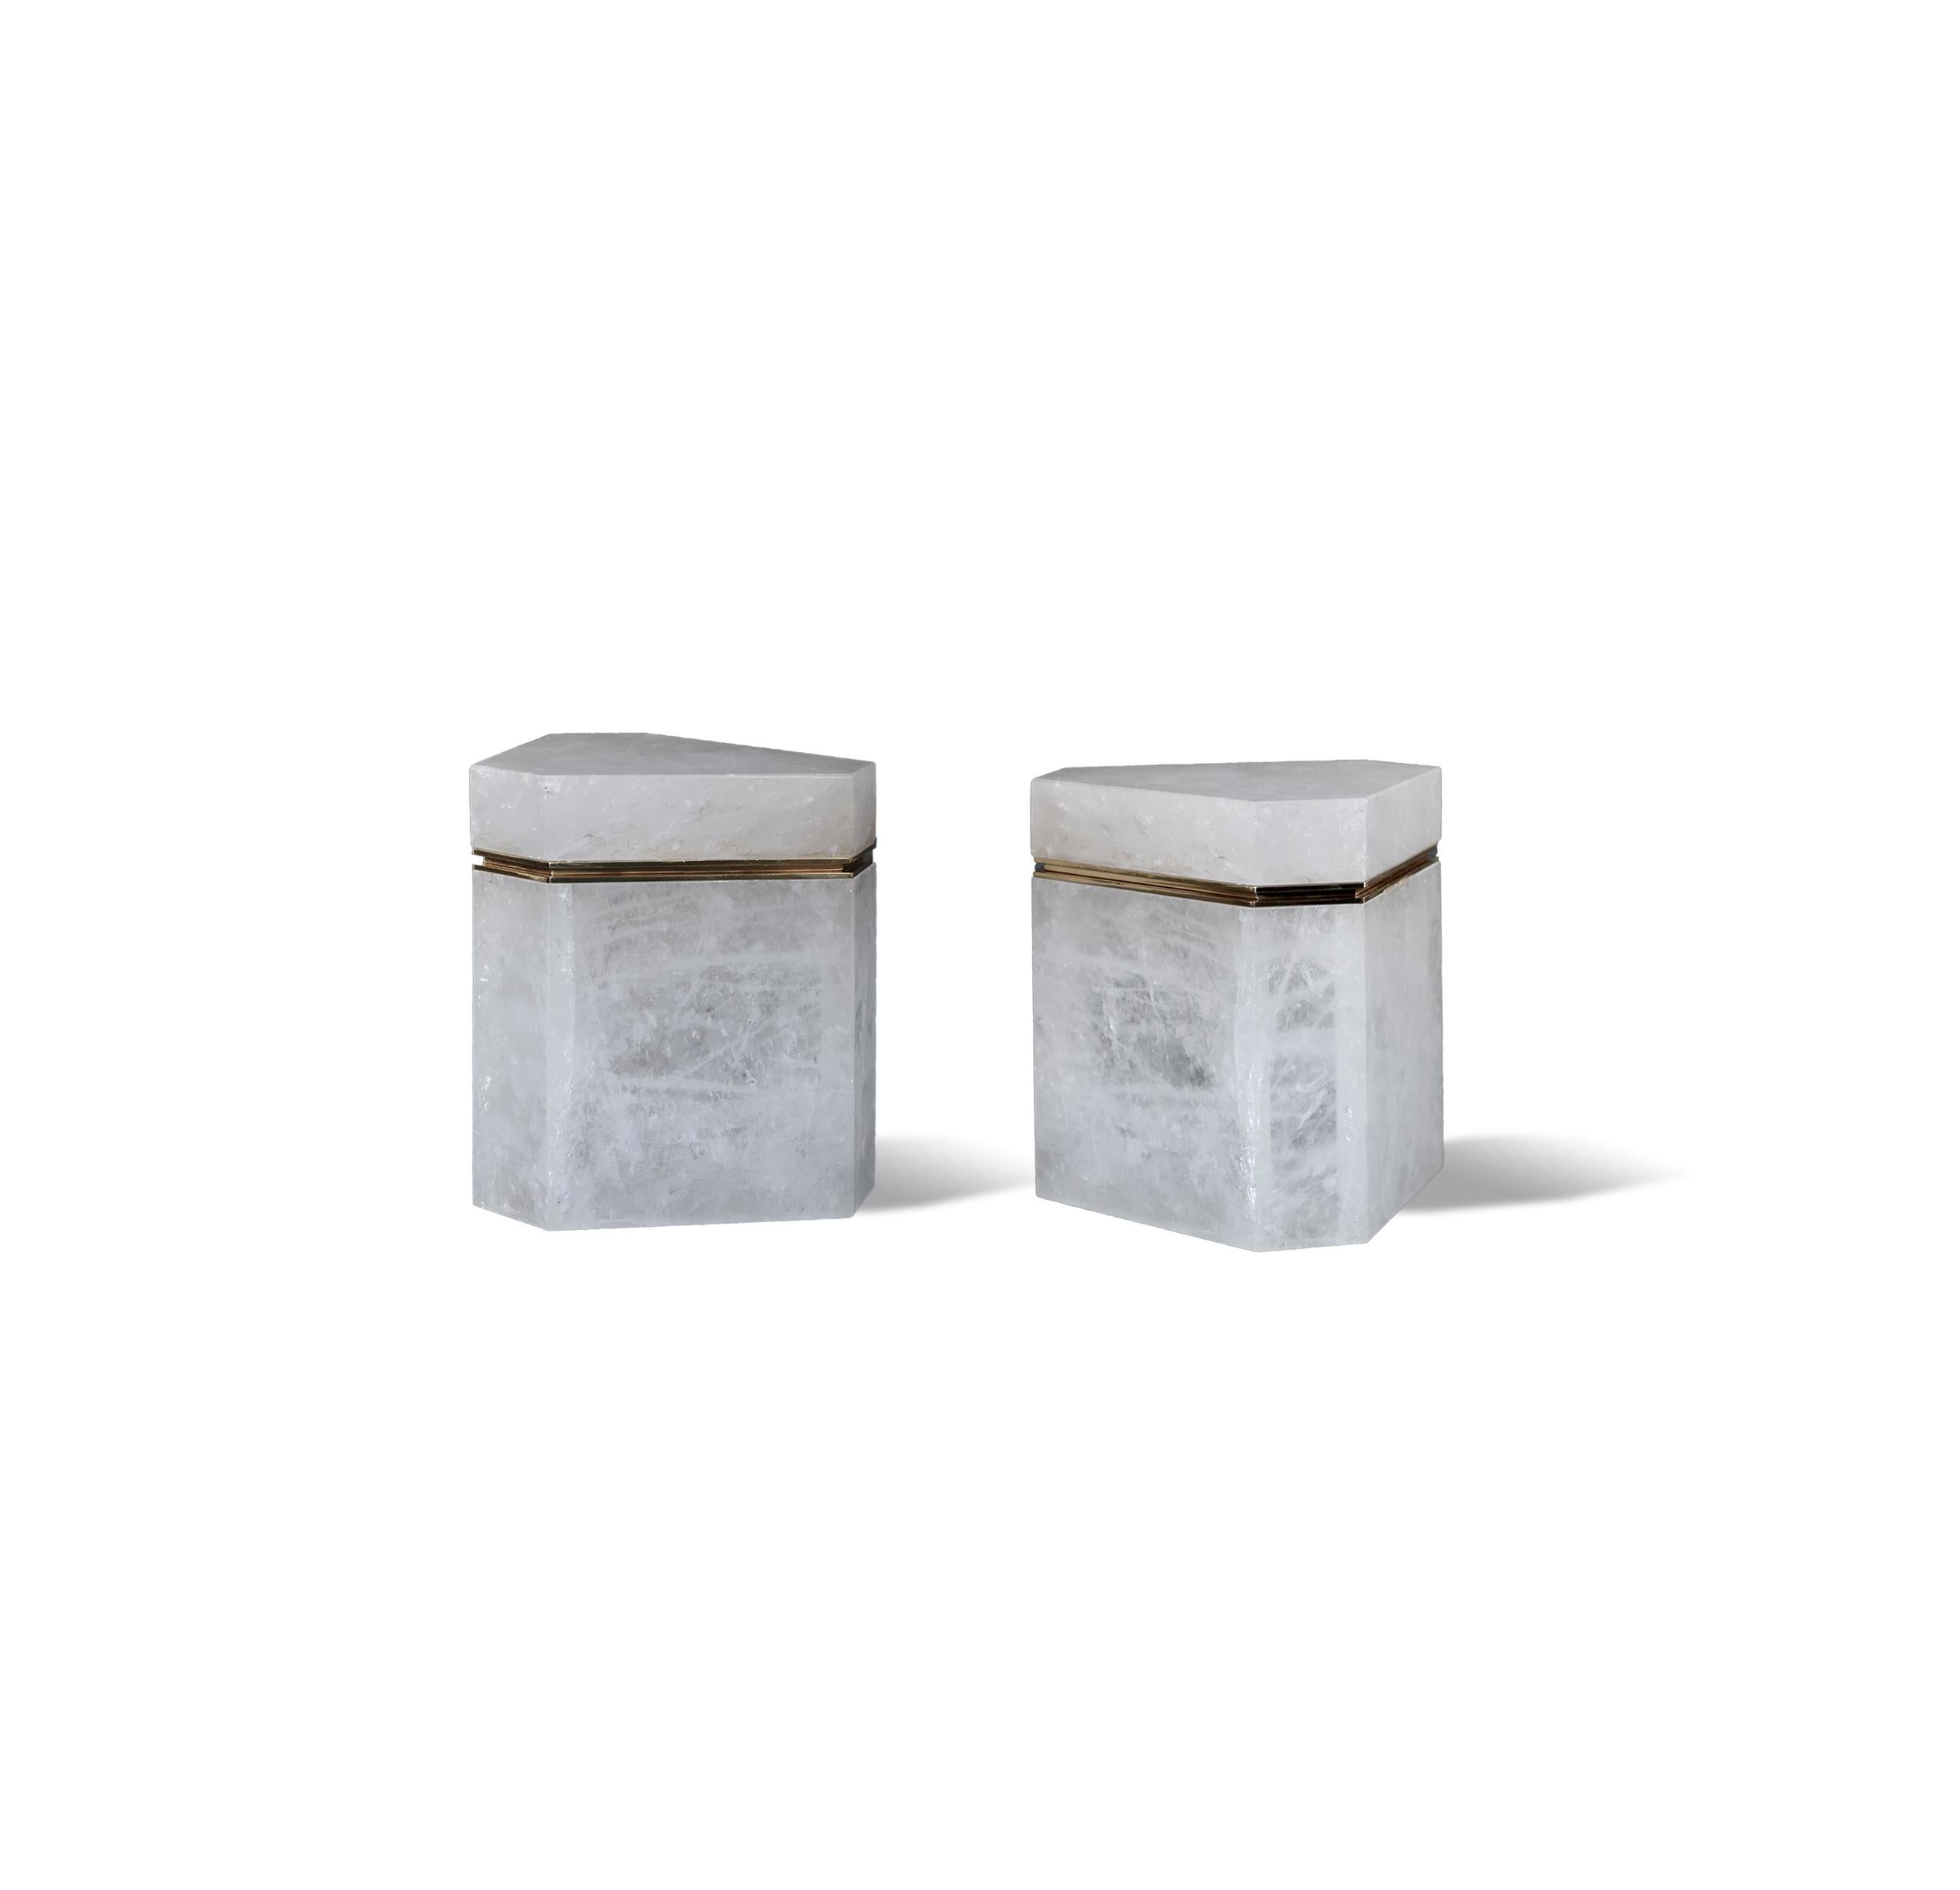 Rock crystal boxes with covers, polish brass decoration. Created by Phoenix Gallery. 
Custom size, metal finish, and quantity upon request.

Dimensions :
Large : 8.75